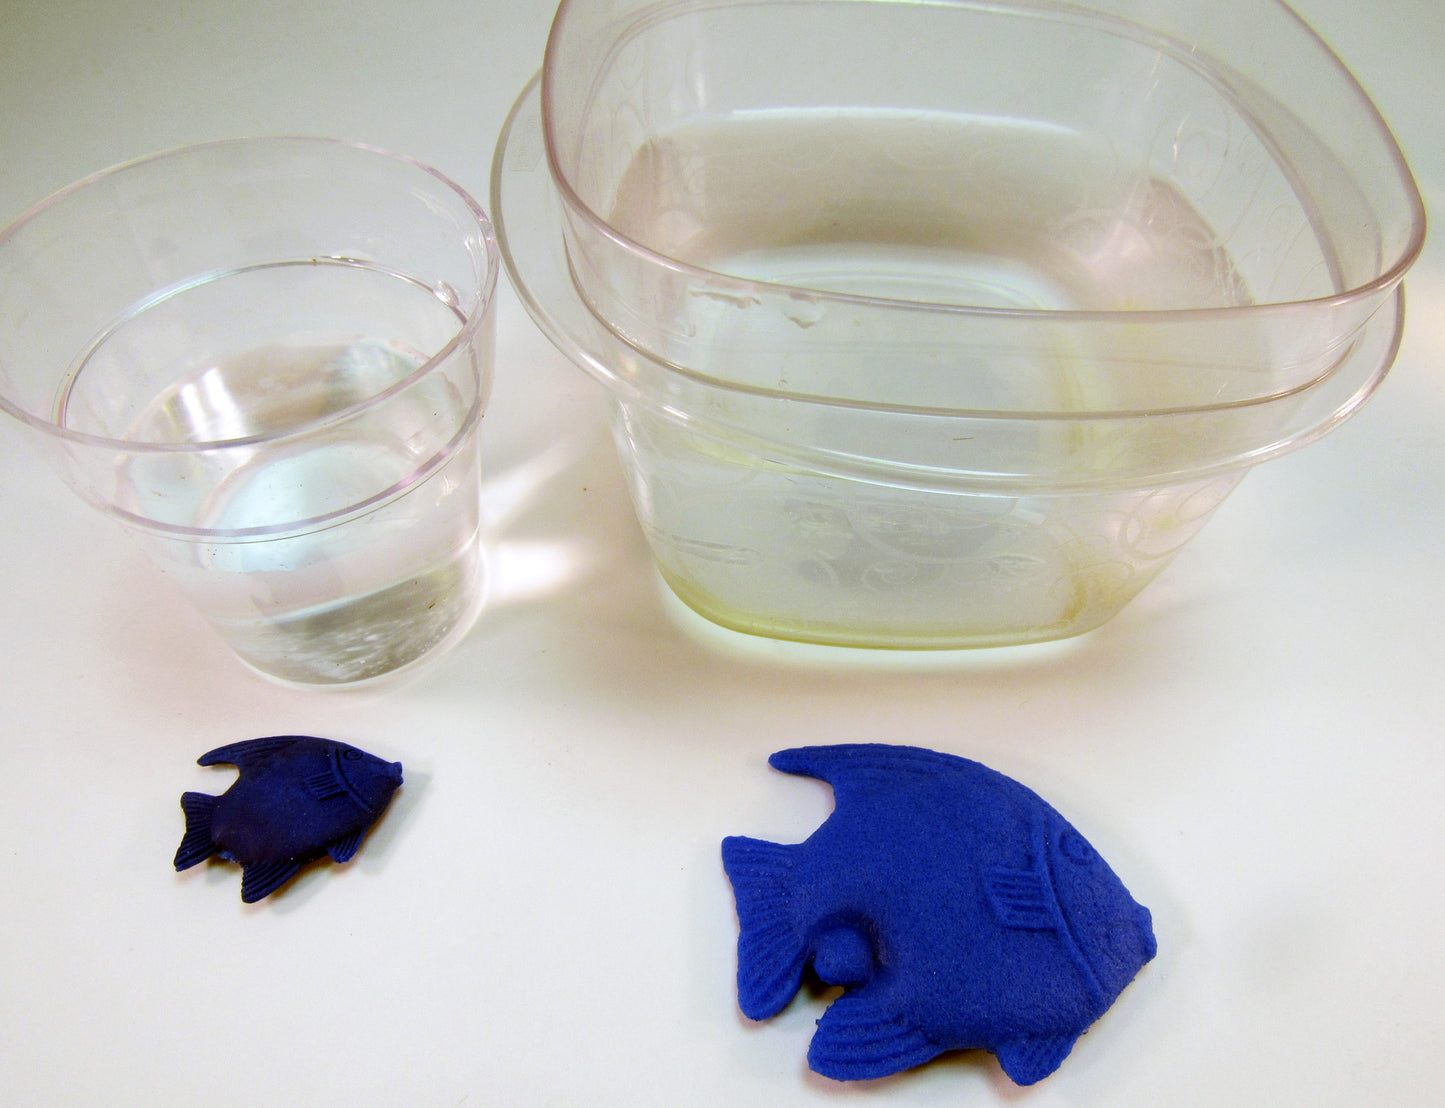 Growing Creatures: Science Activity inspired by A Fish Out of Water by Helen Palmer